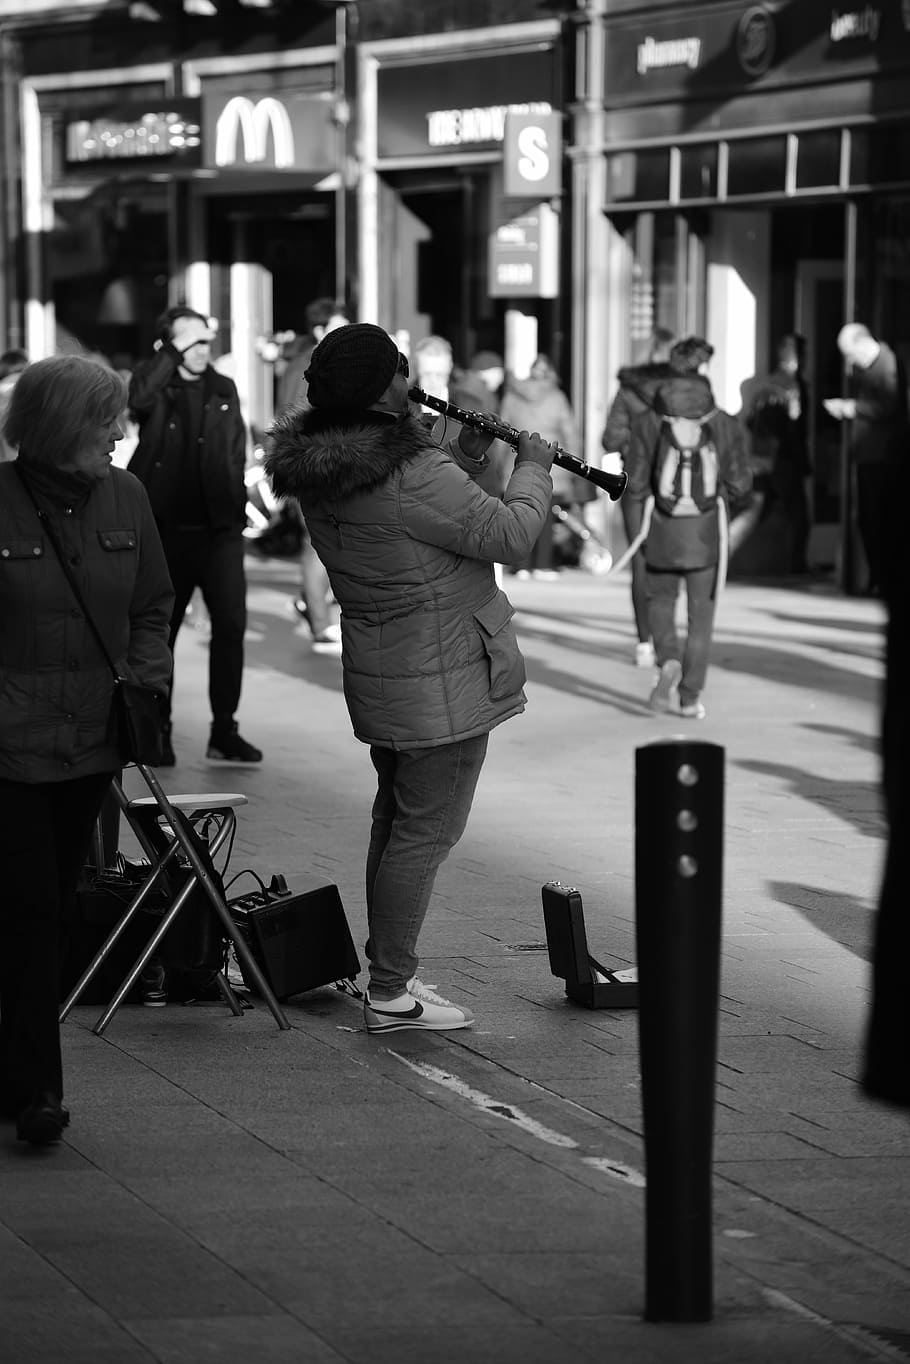 musician, street, performance, urban, person, artist, playing, play, sound, musical